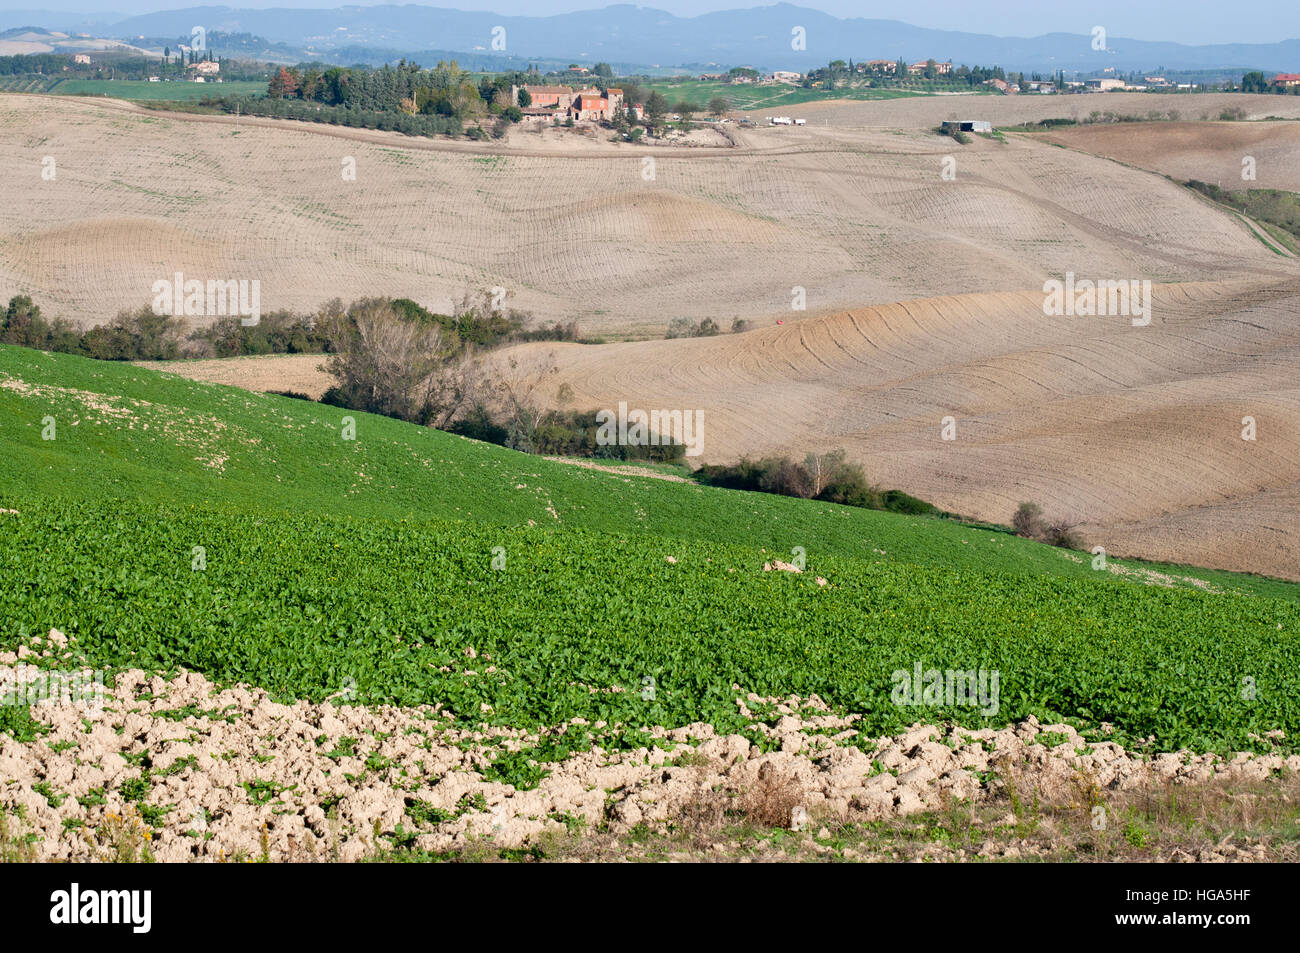 View of cultivated fields in the Crete Senesi region in Tuscany central of Italy Stock Photo